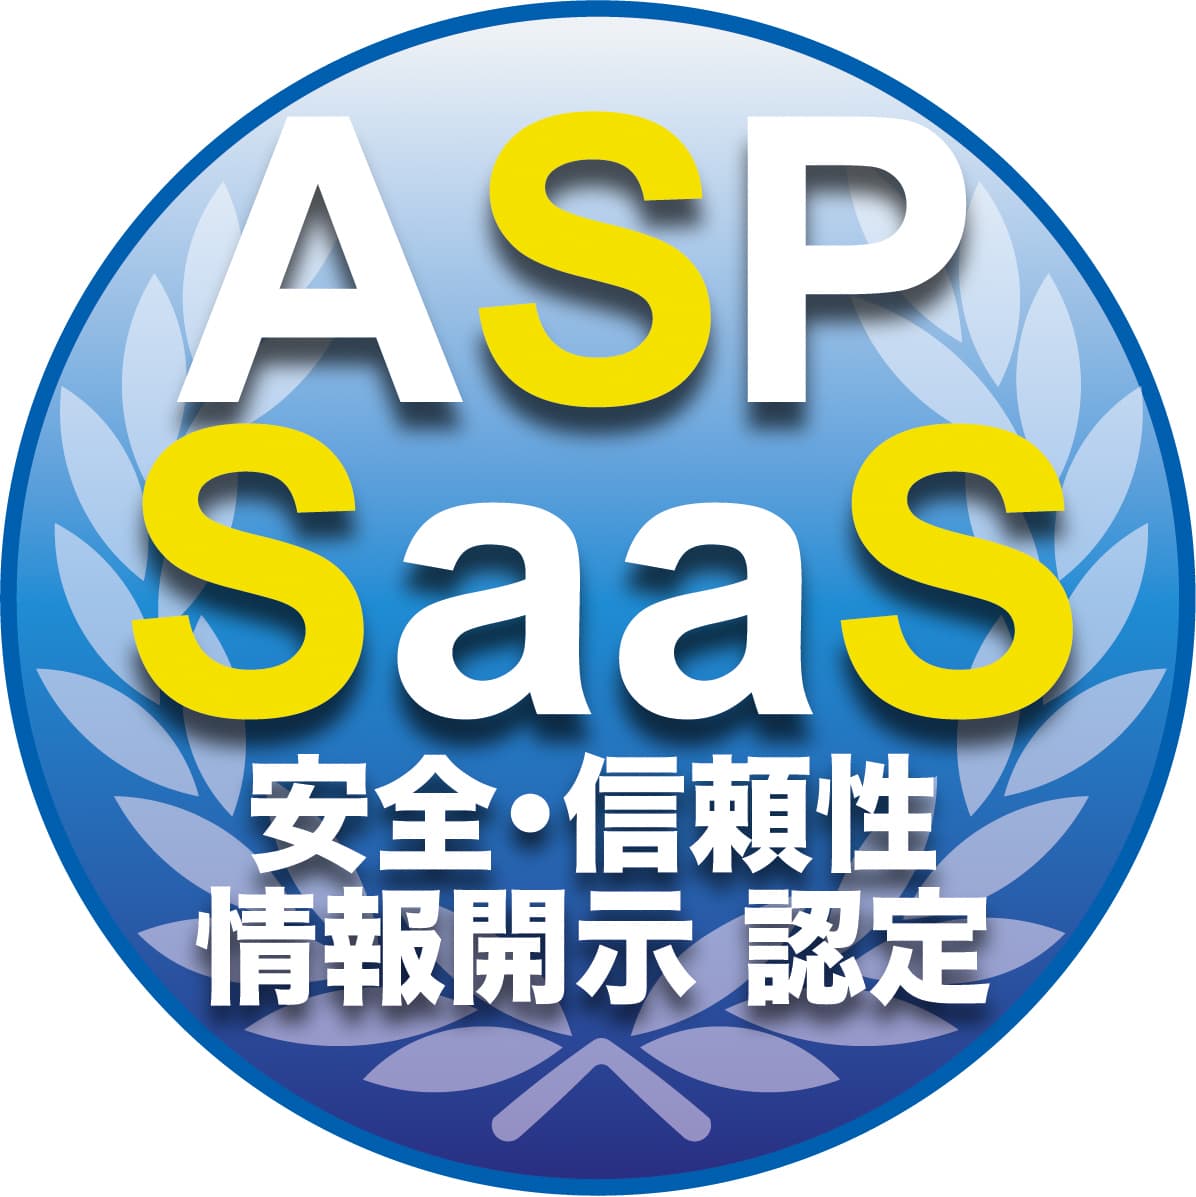 Information Disclosure Certification for Safety and Reliability of ASP/SaaS Services Mark